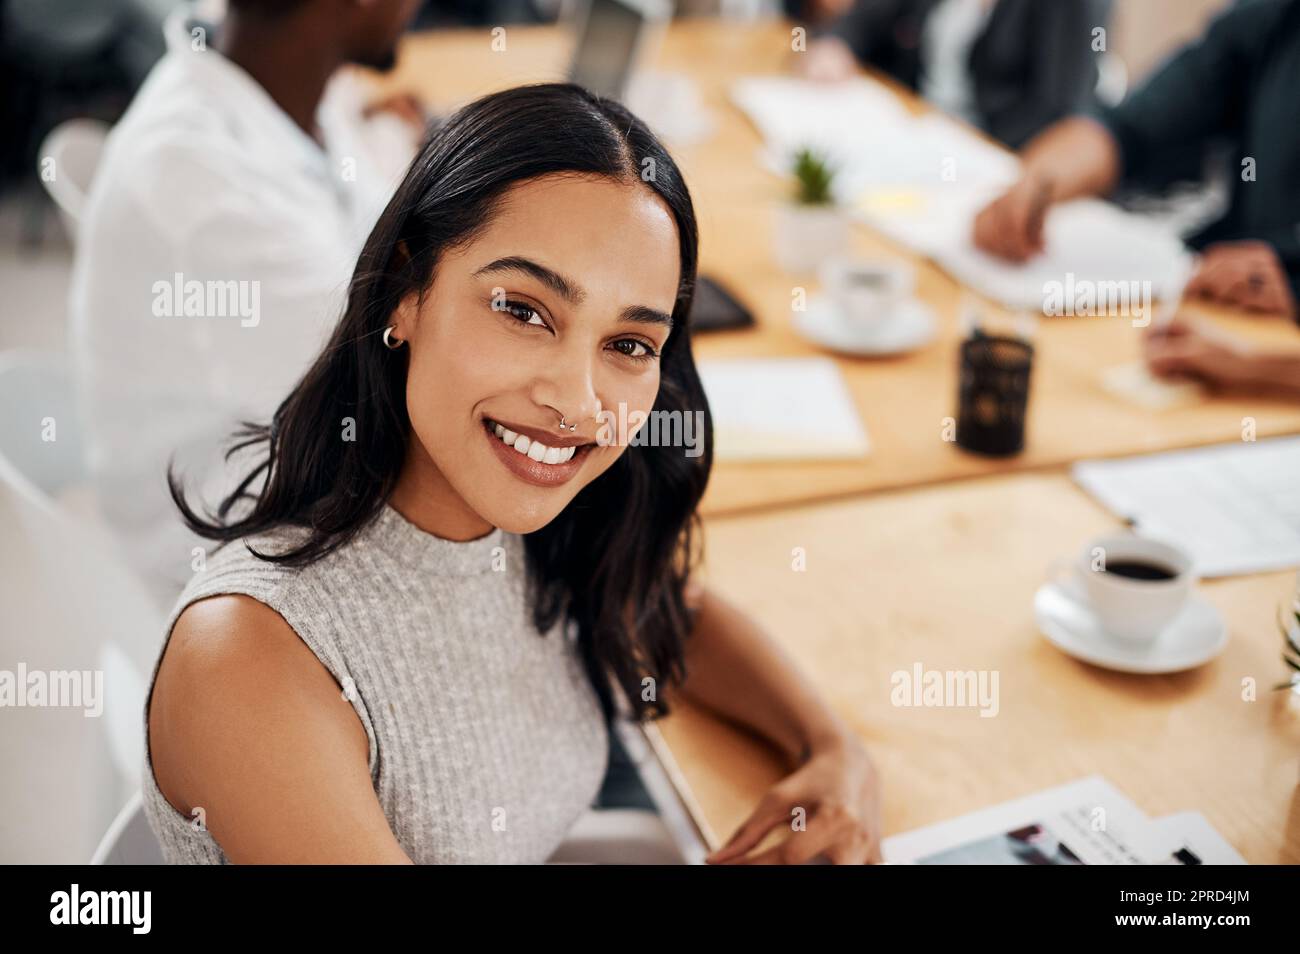 Ive reached a great sense of fulfilment in my career. Portrait of a young businesswoman sitting in an office with her colleagues in the background. Stock Photo